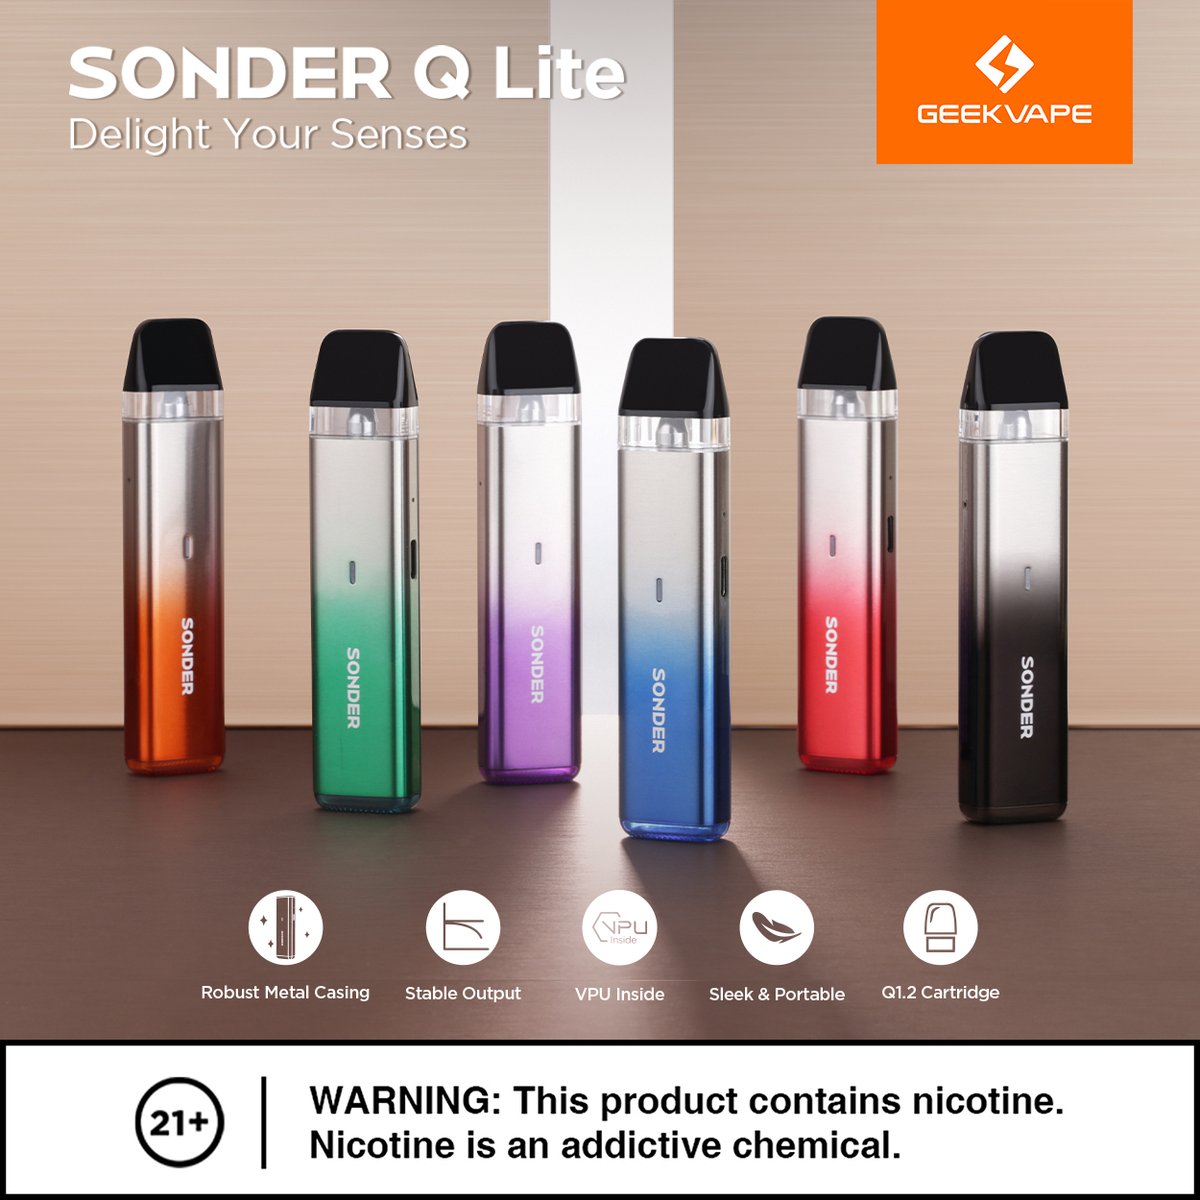 💫Meet the Sonder Q Lite in all its vibrant colors! This sleek, durable device with a glossy metallic finish is here to elevate your vaping experience. Which color will you rock today? #SonderQLite #geekvape #ExplosiveLaunch #ecigarette #stopsmokingstartvaping #dampfer